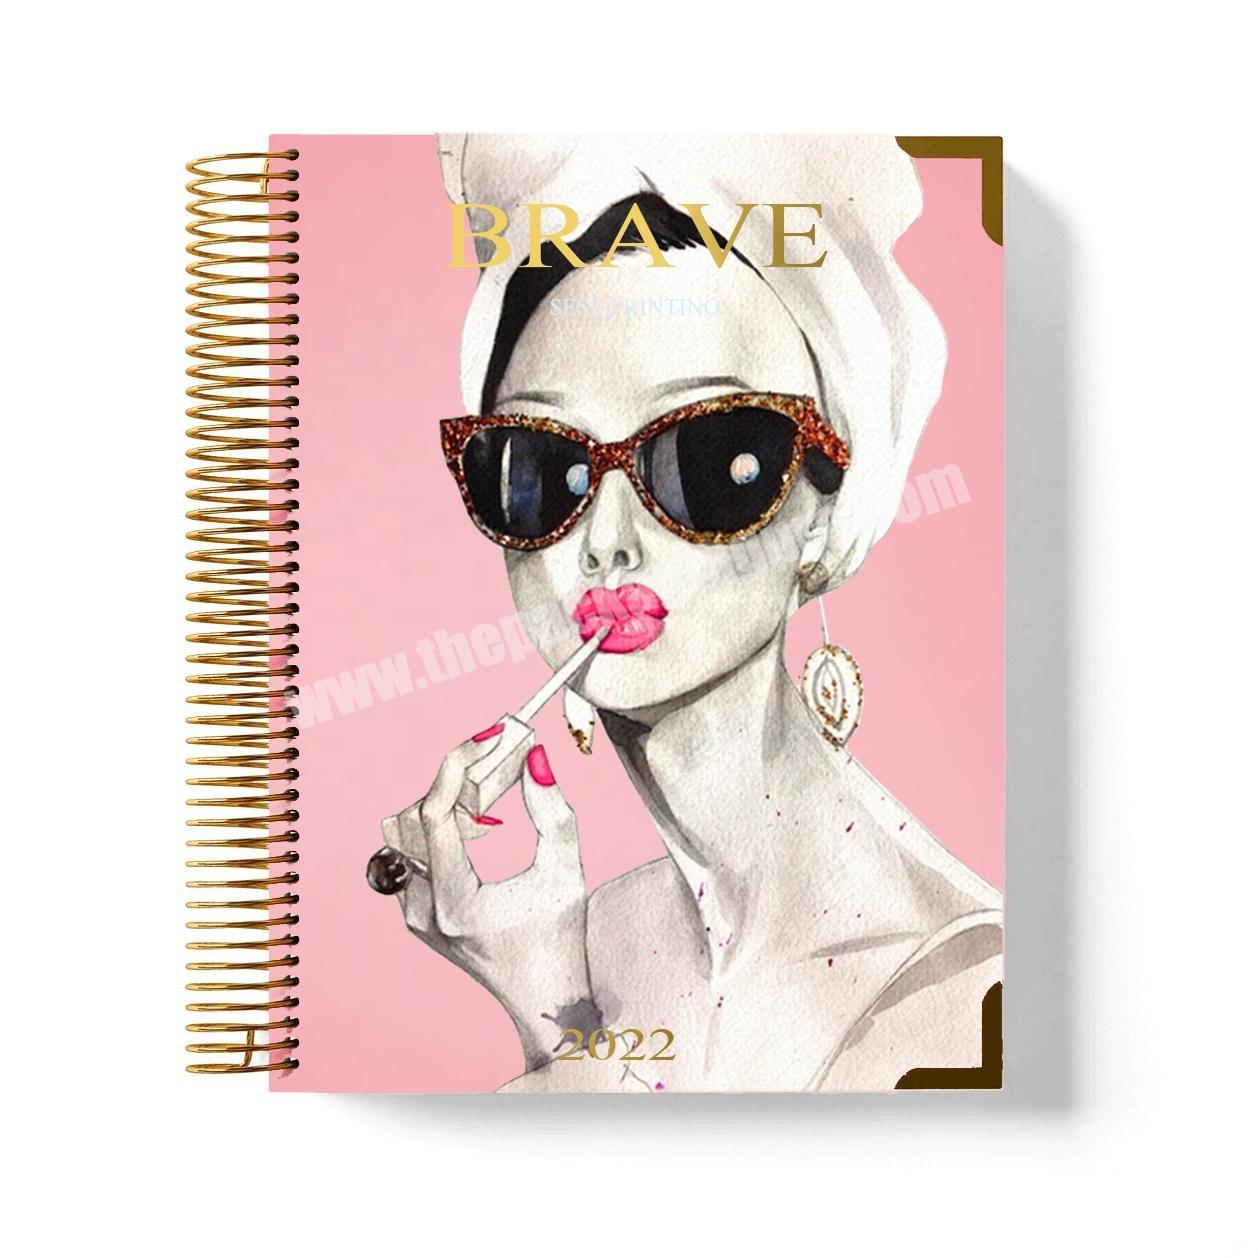 Artwork Printing Custom Daily Gym Goal Agenda Journal And Fitness Diary Planner For Healthy Workouts